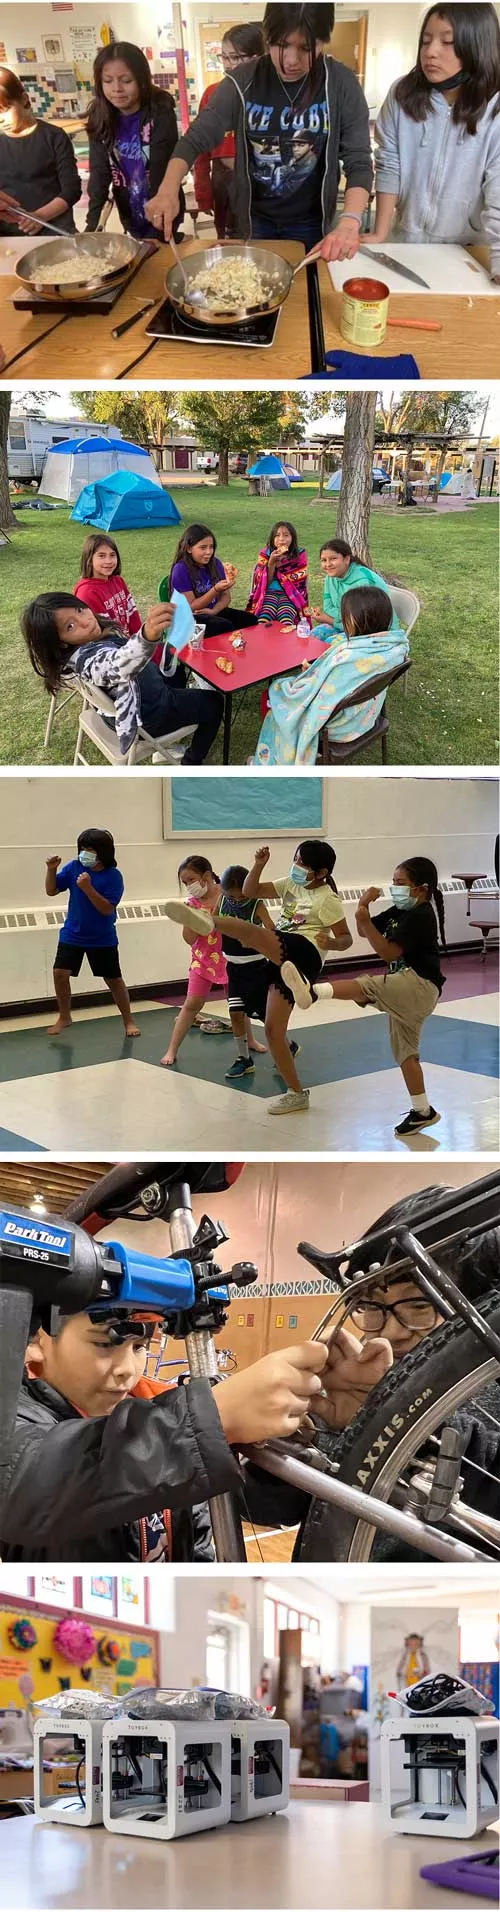 Photo Gallery of Taos Day School Students Cooking, Having a Picnic Outside, Participating in a Tae Kwon Do Class, Fixing a Bike, and Microscopes on a Table.